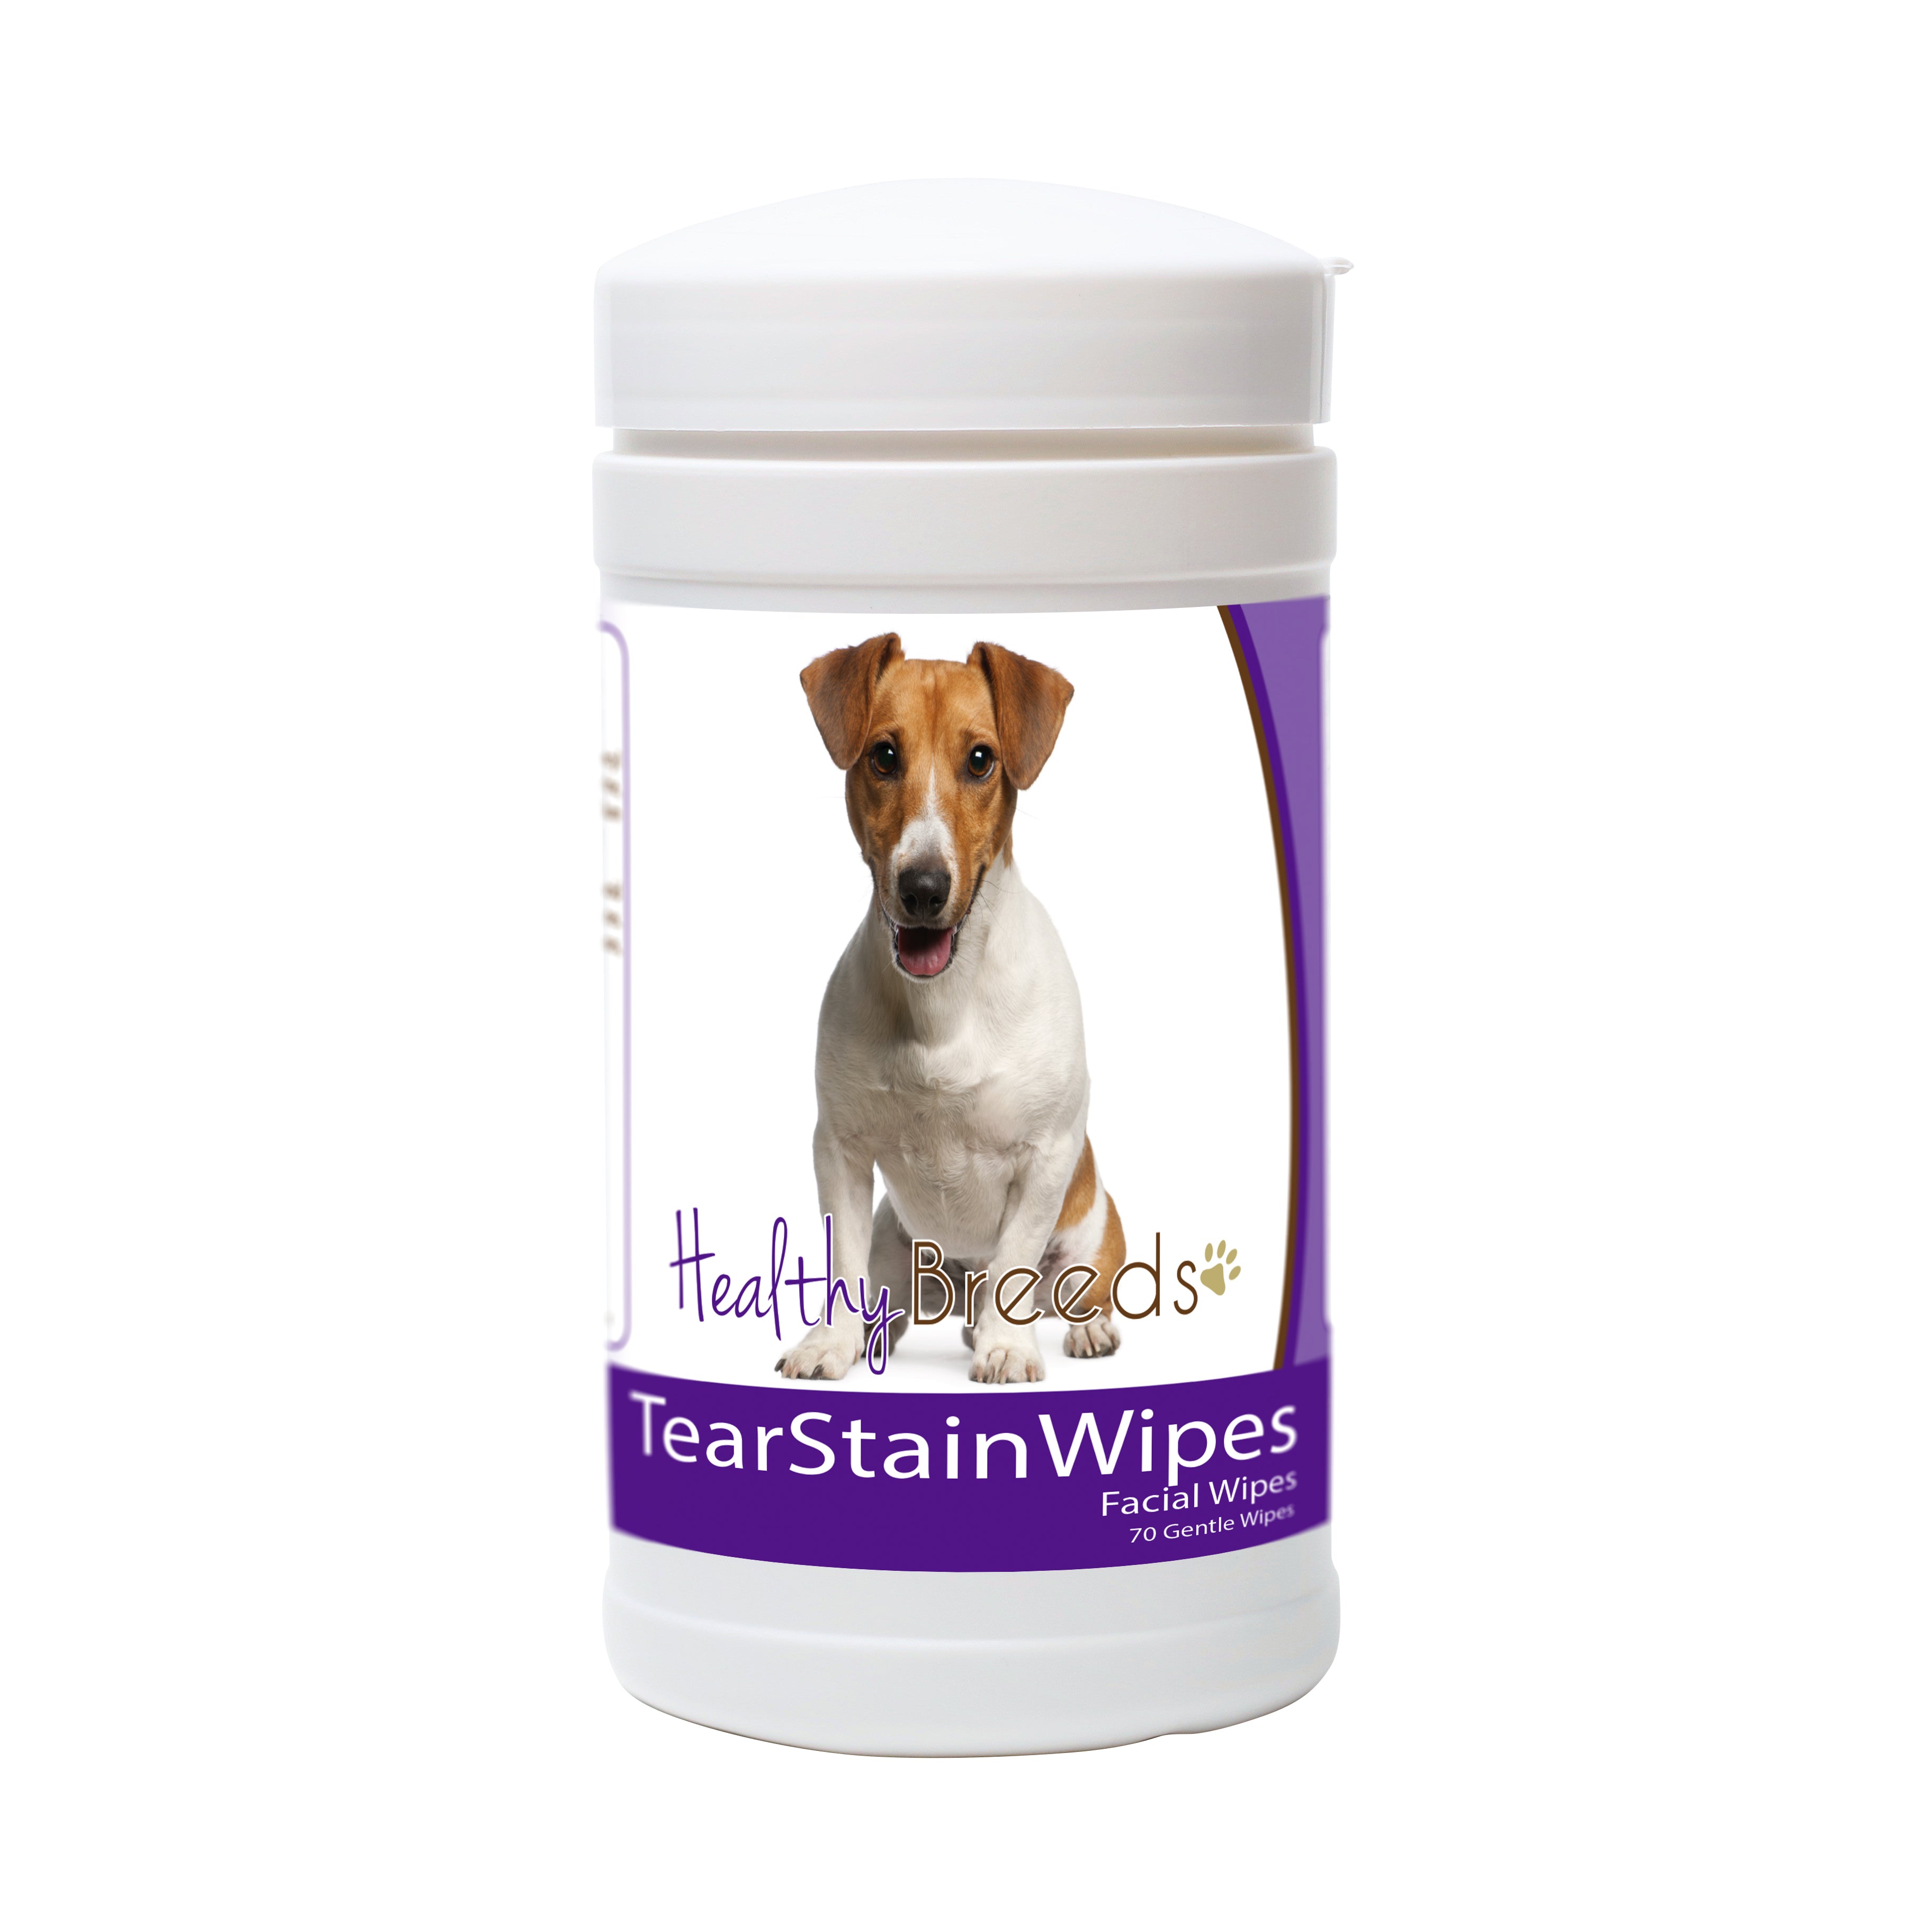 Jack Russell Terrier Tear Stain Wipes 70 Count